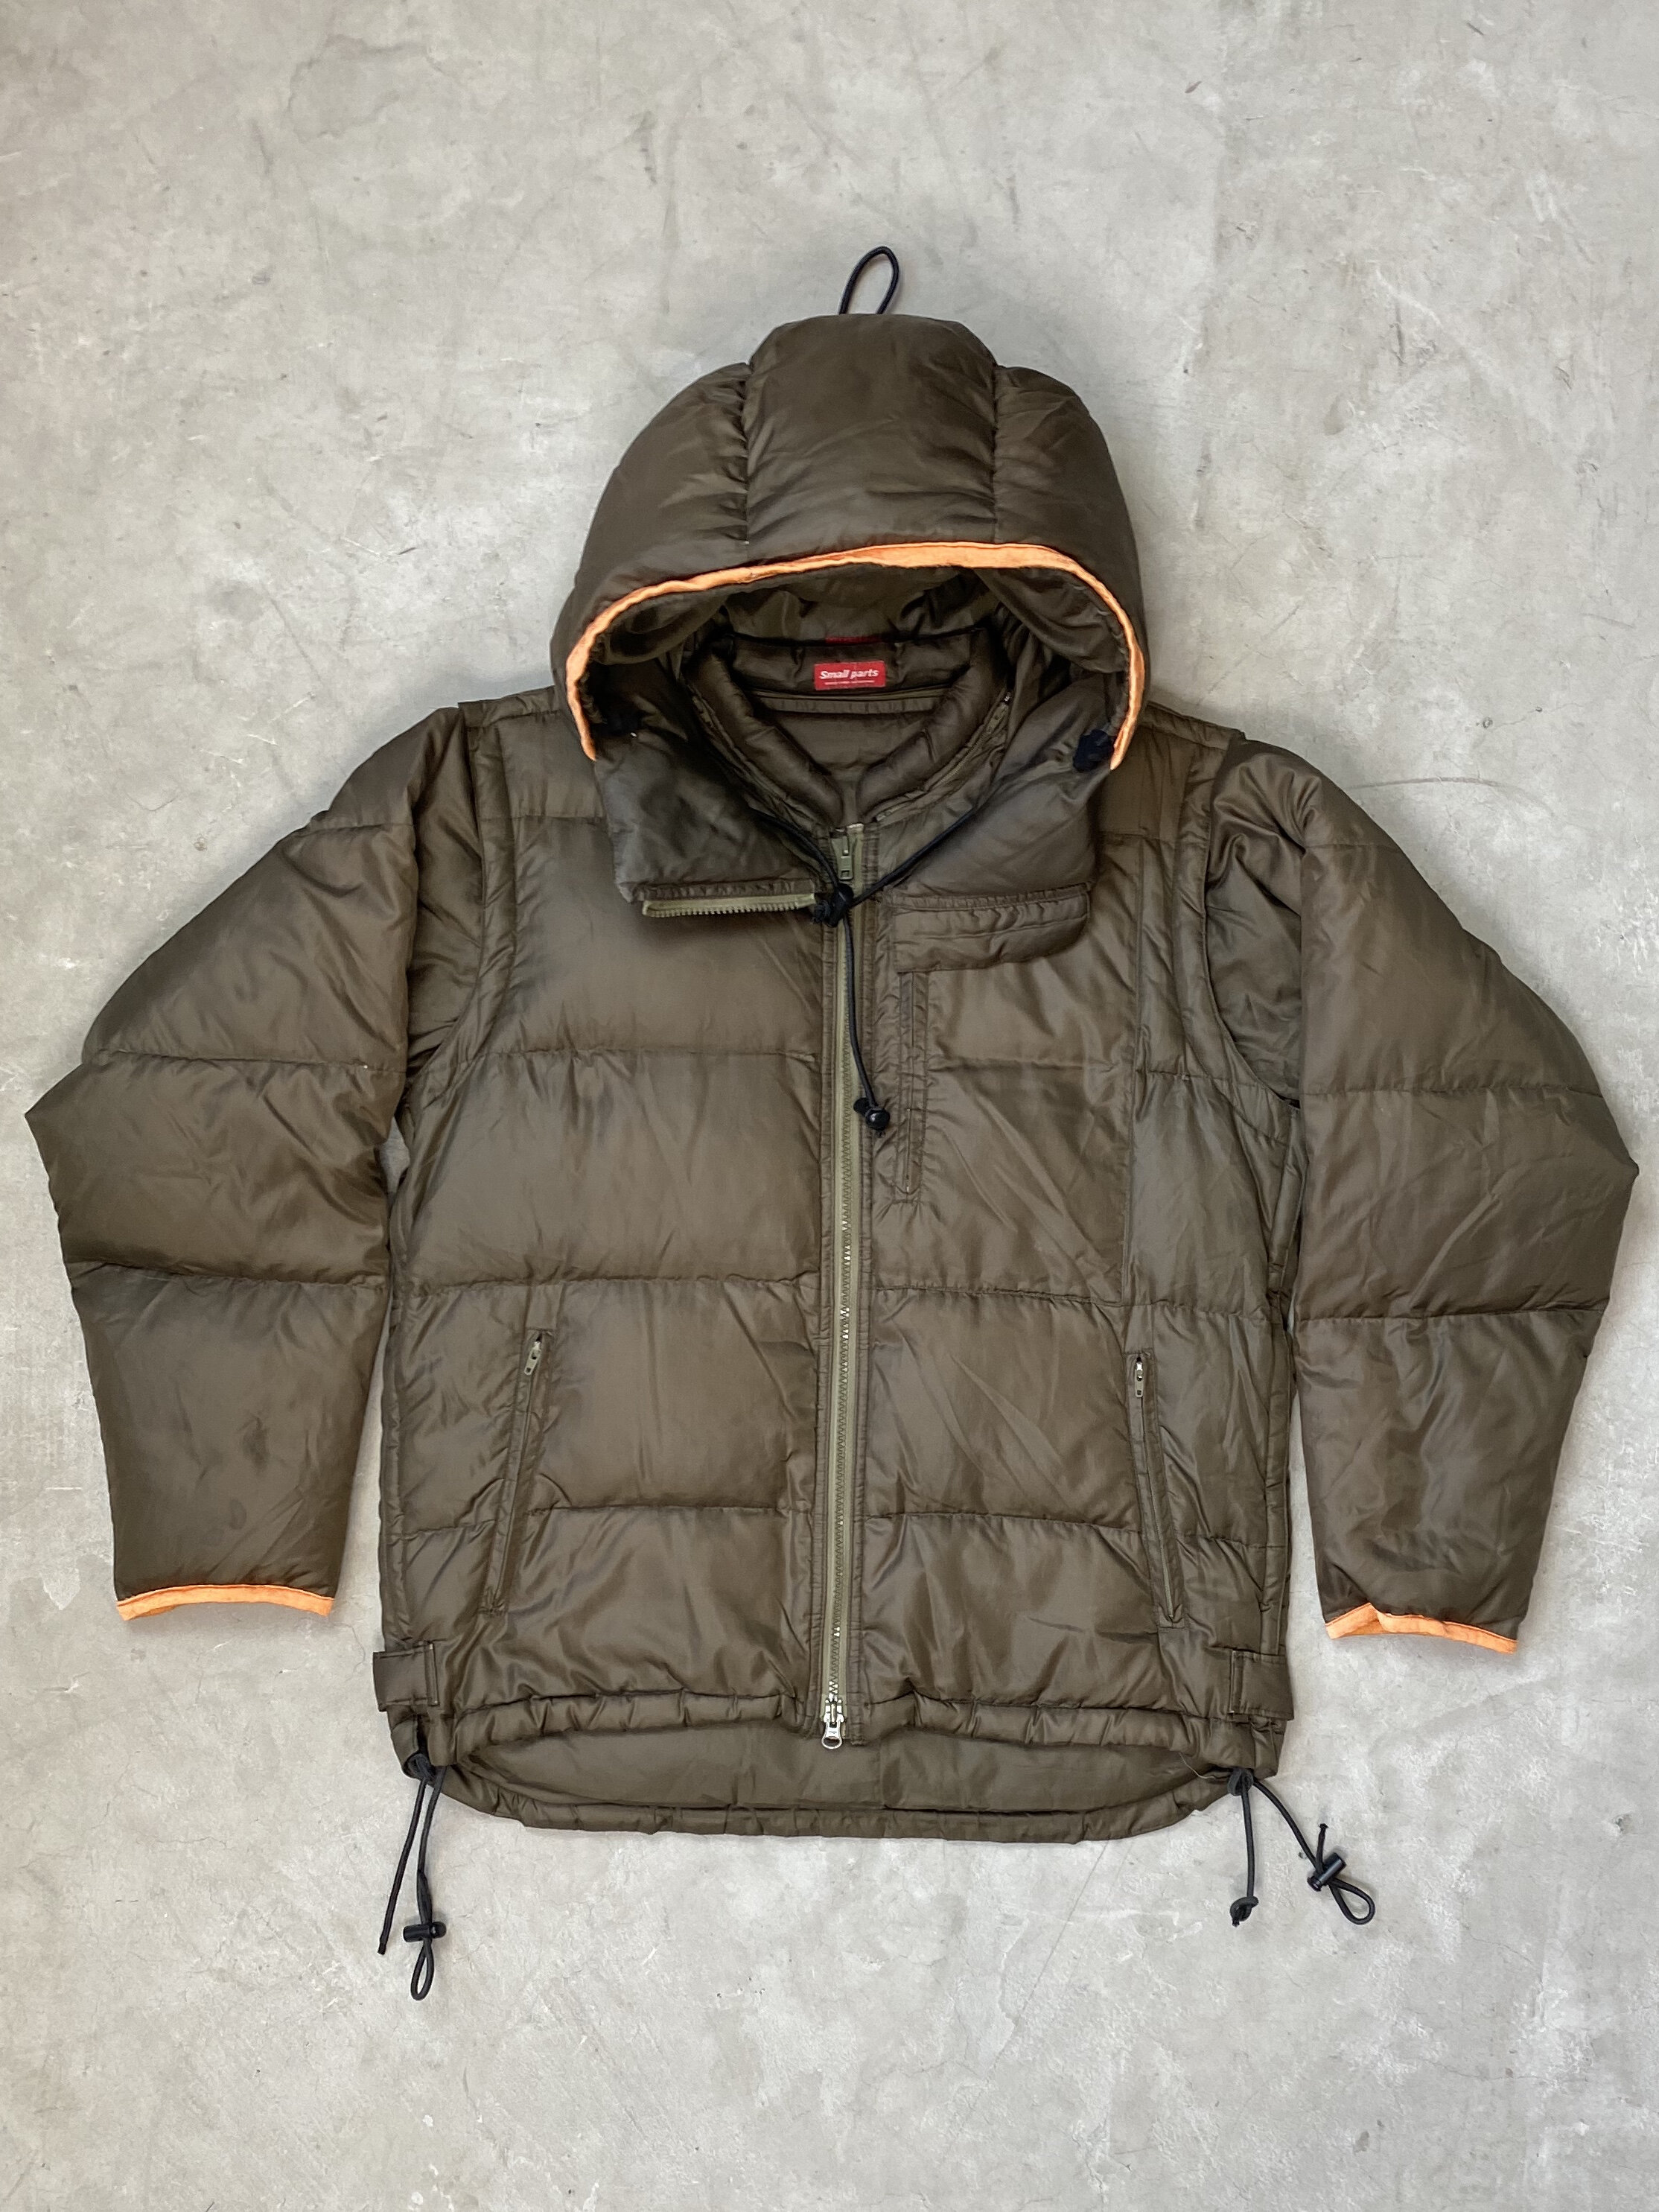 AW/98-99 Undercover Small Parts Puffer Jacket — murderarchive